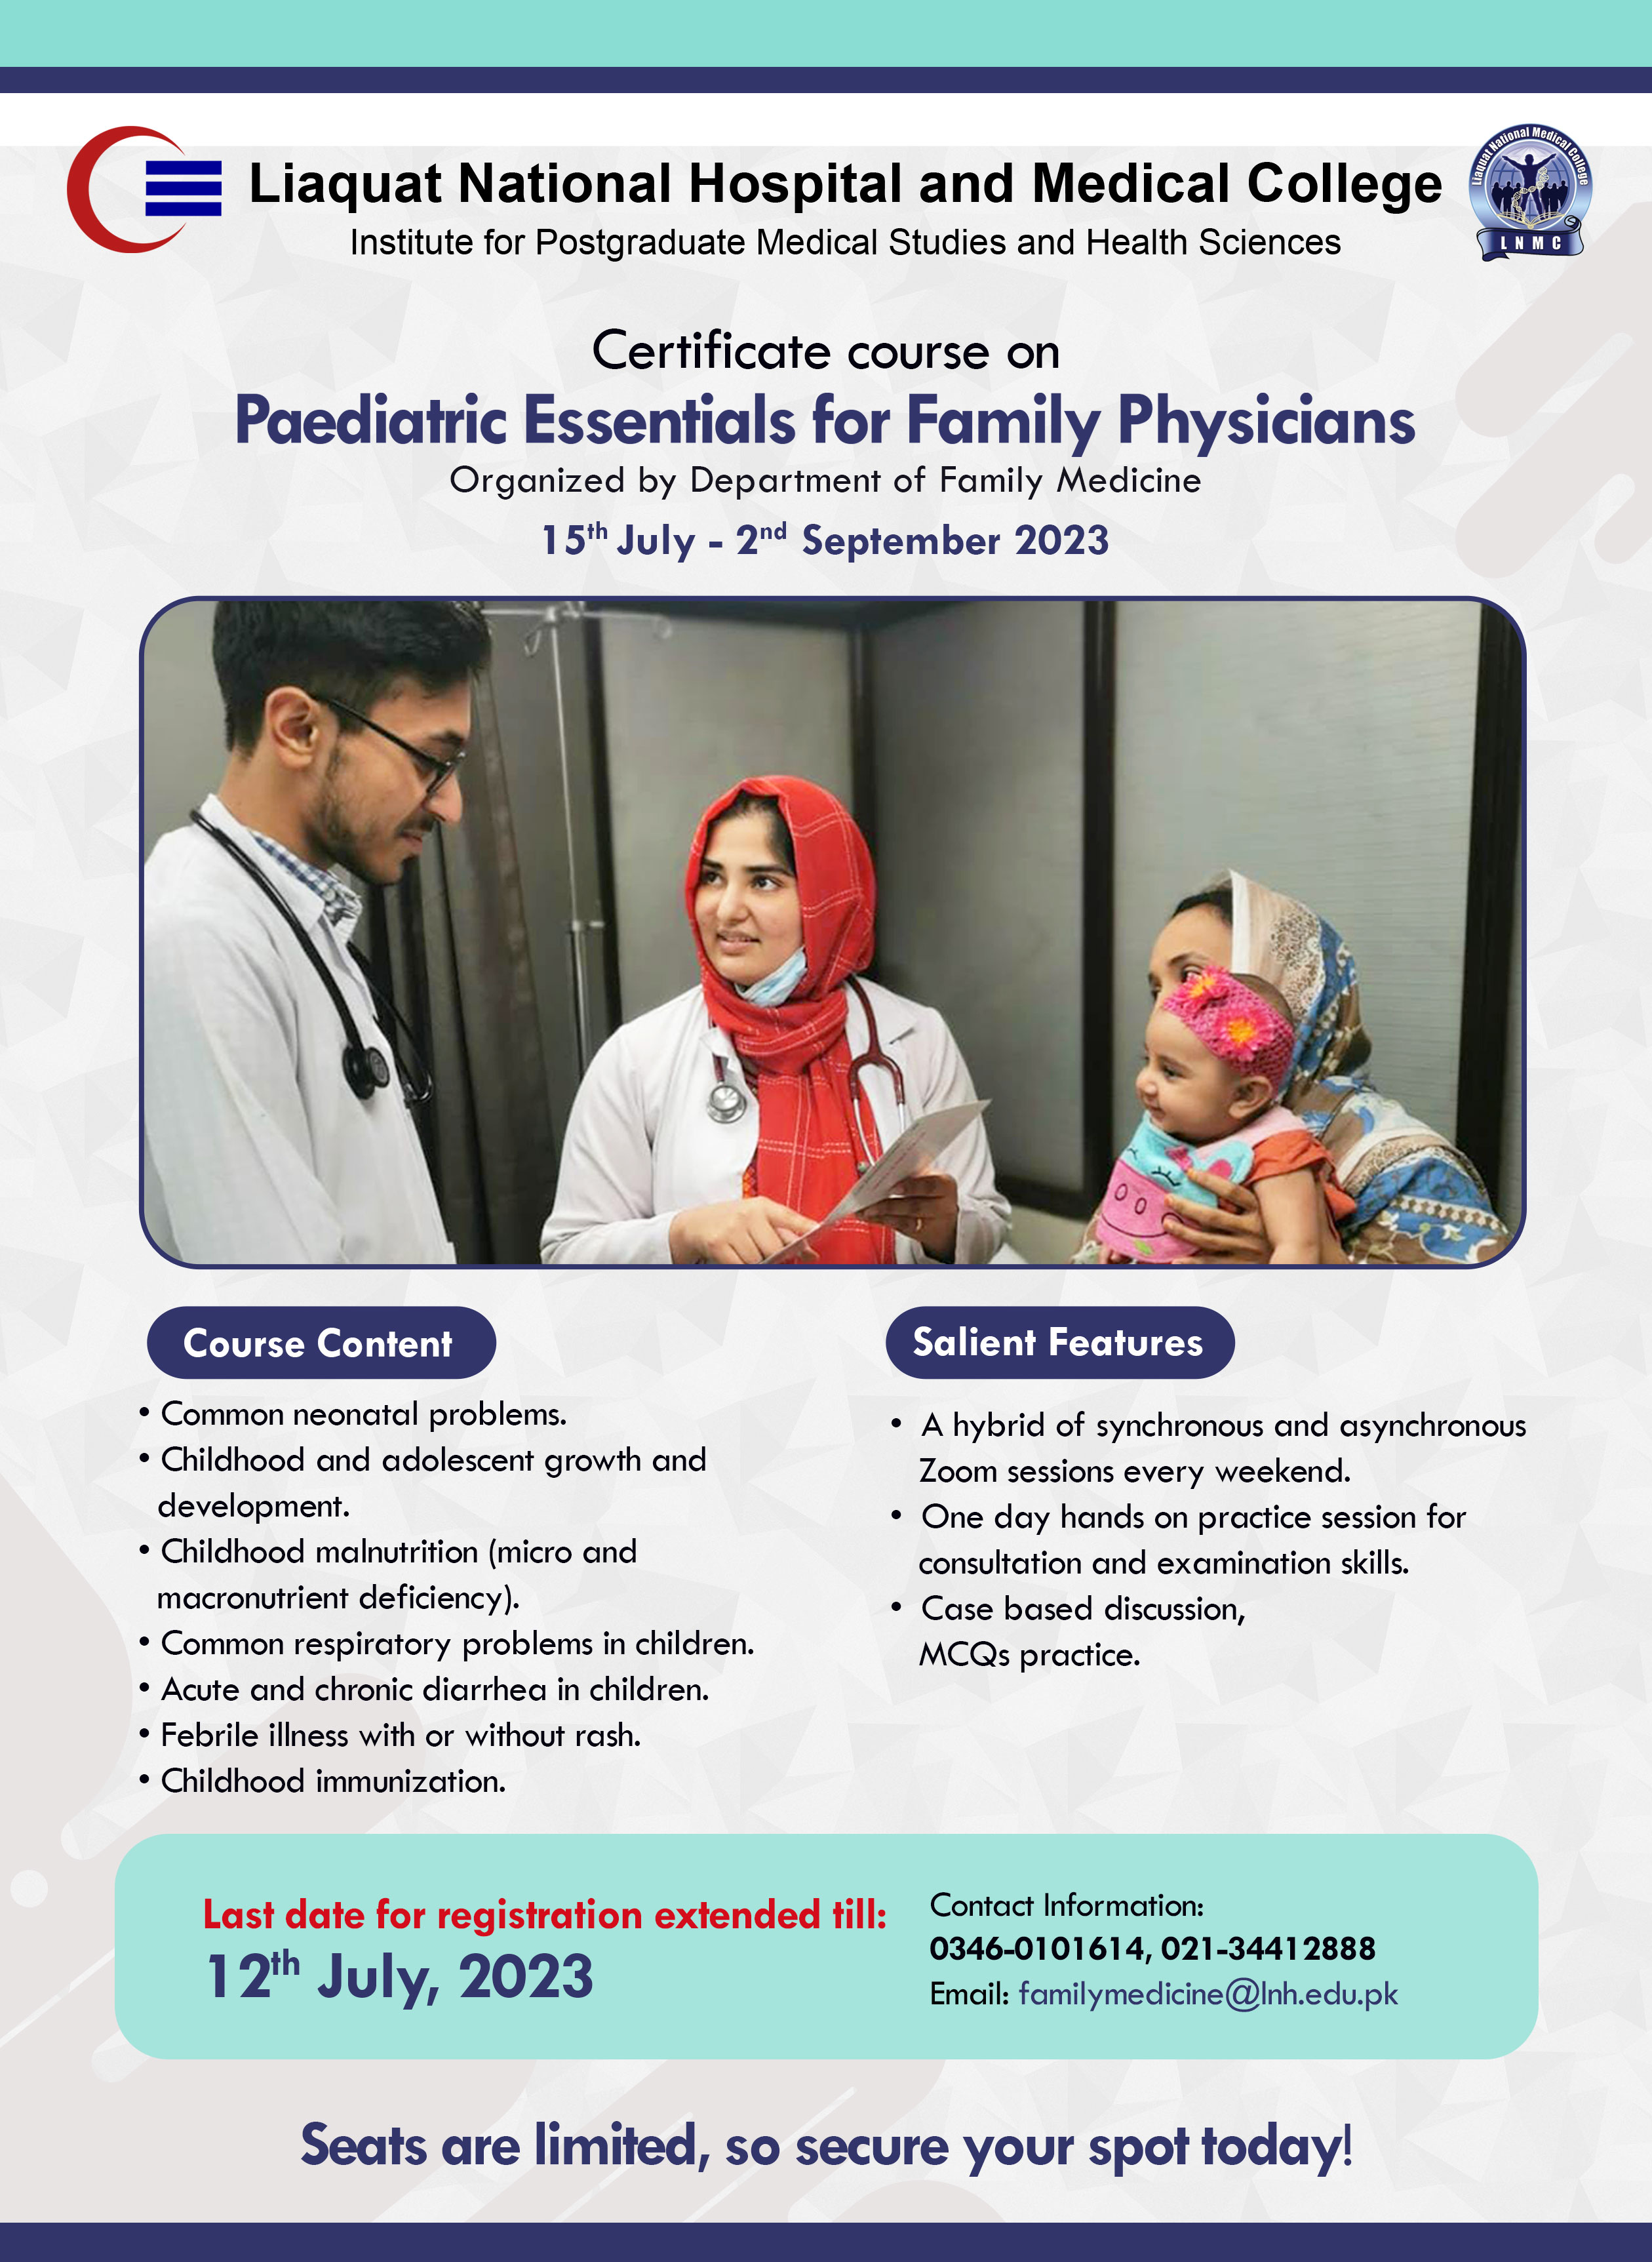 Certificate Course on Paediatric Essentials for Family Physicians, July 15 – Sep 2, 2023